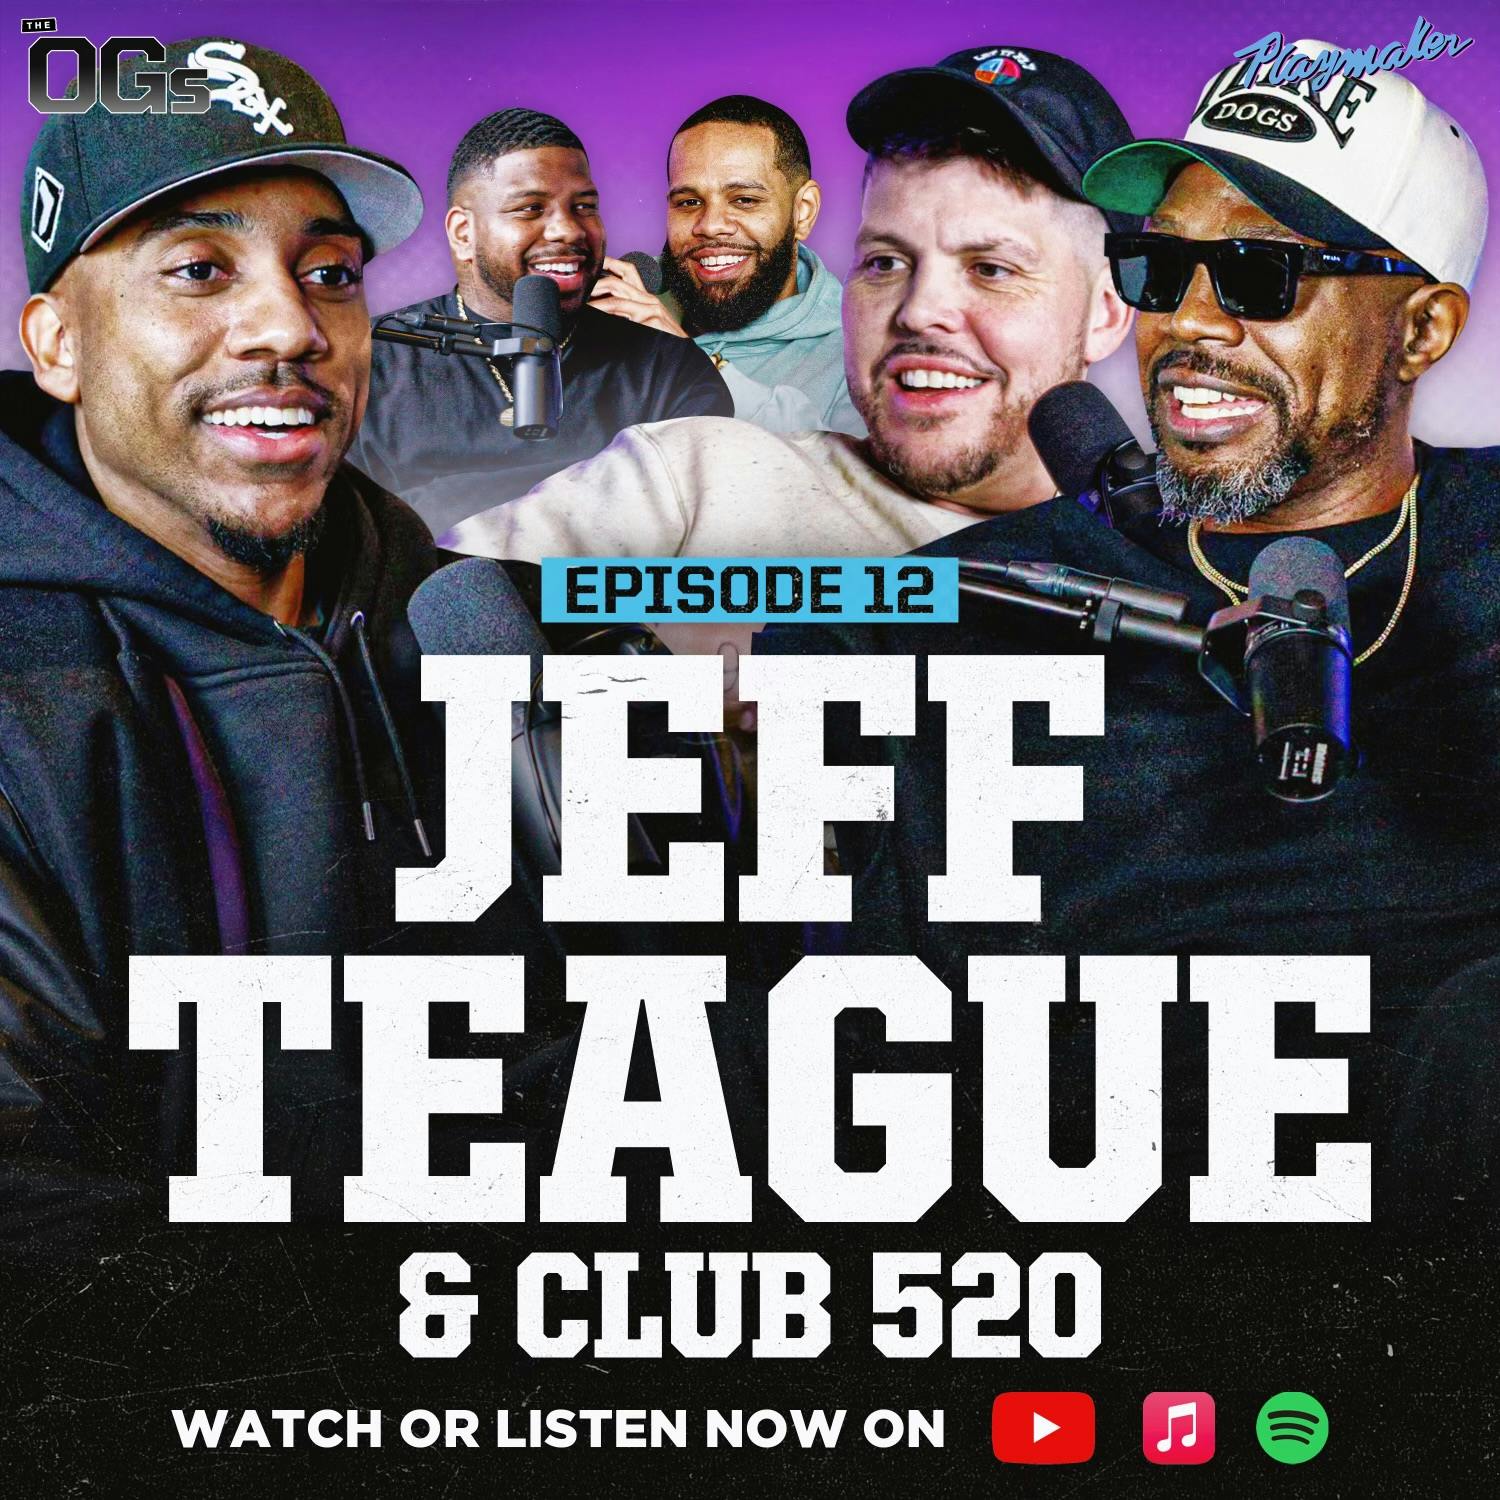 Jeff Teague Sparks HEATED Wade vs Harden Debate & Shares Wild NBA Takes | The OGs Ep. 12